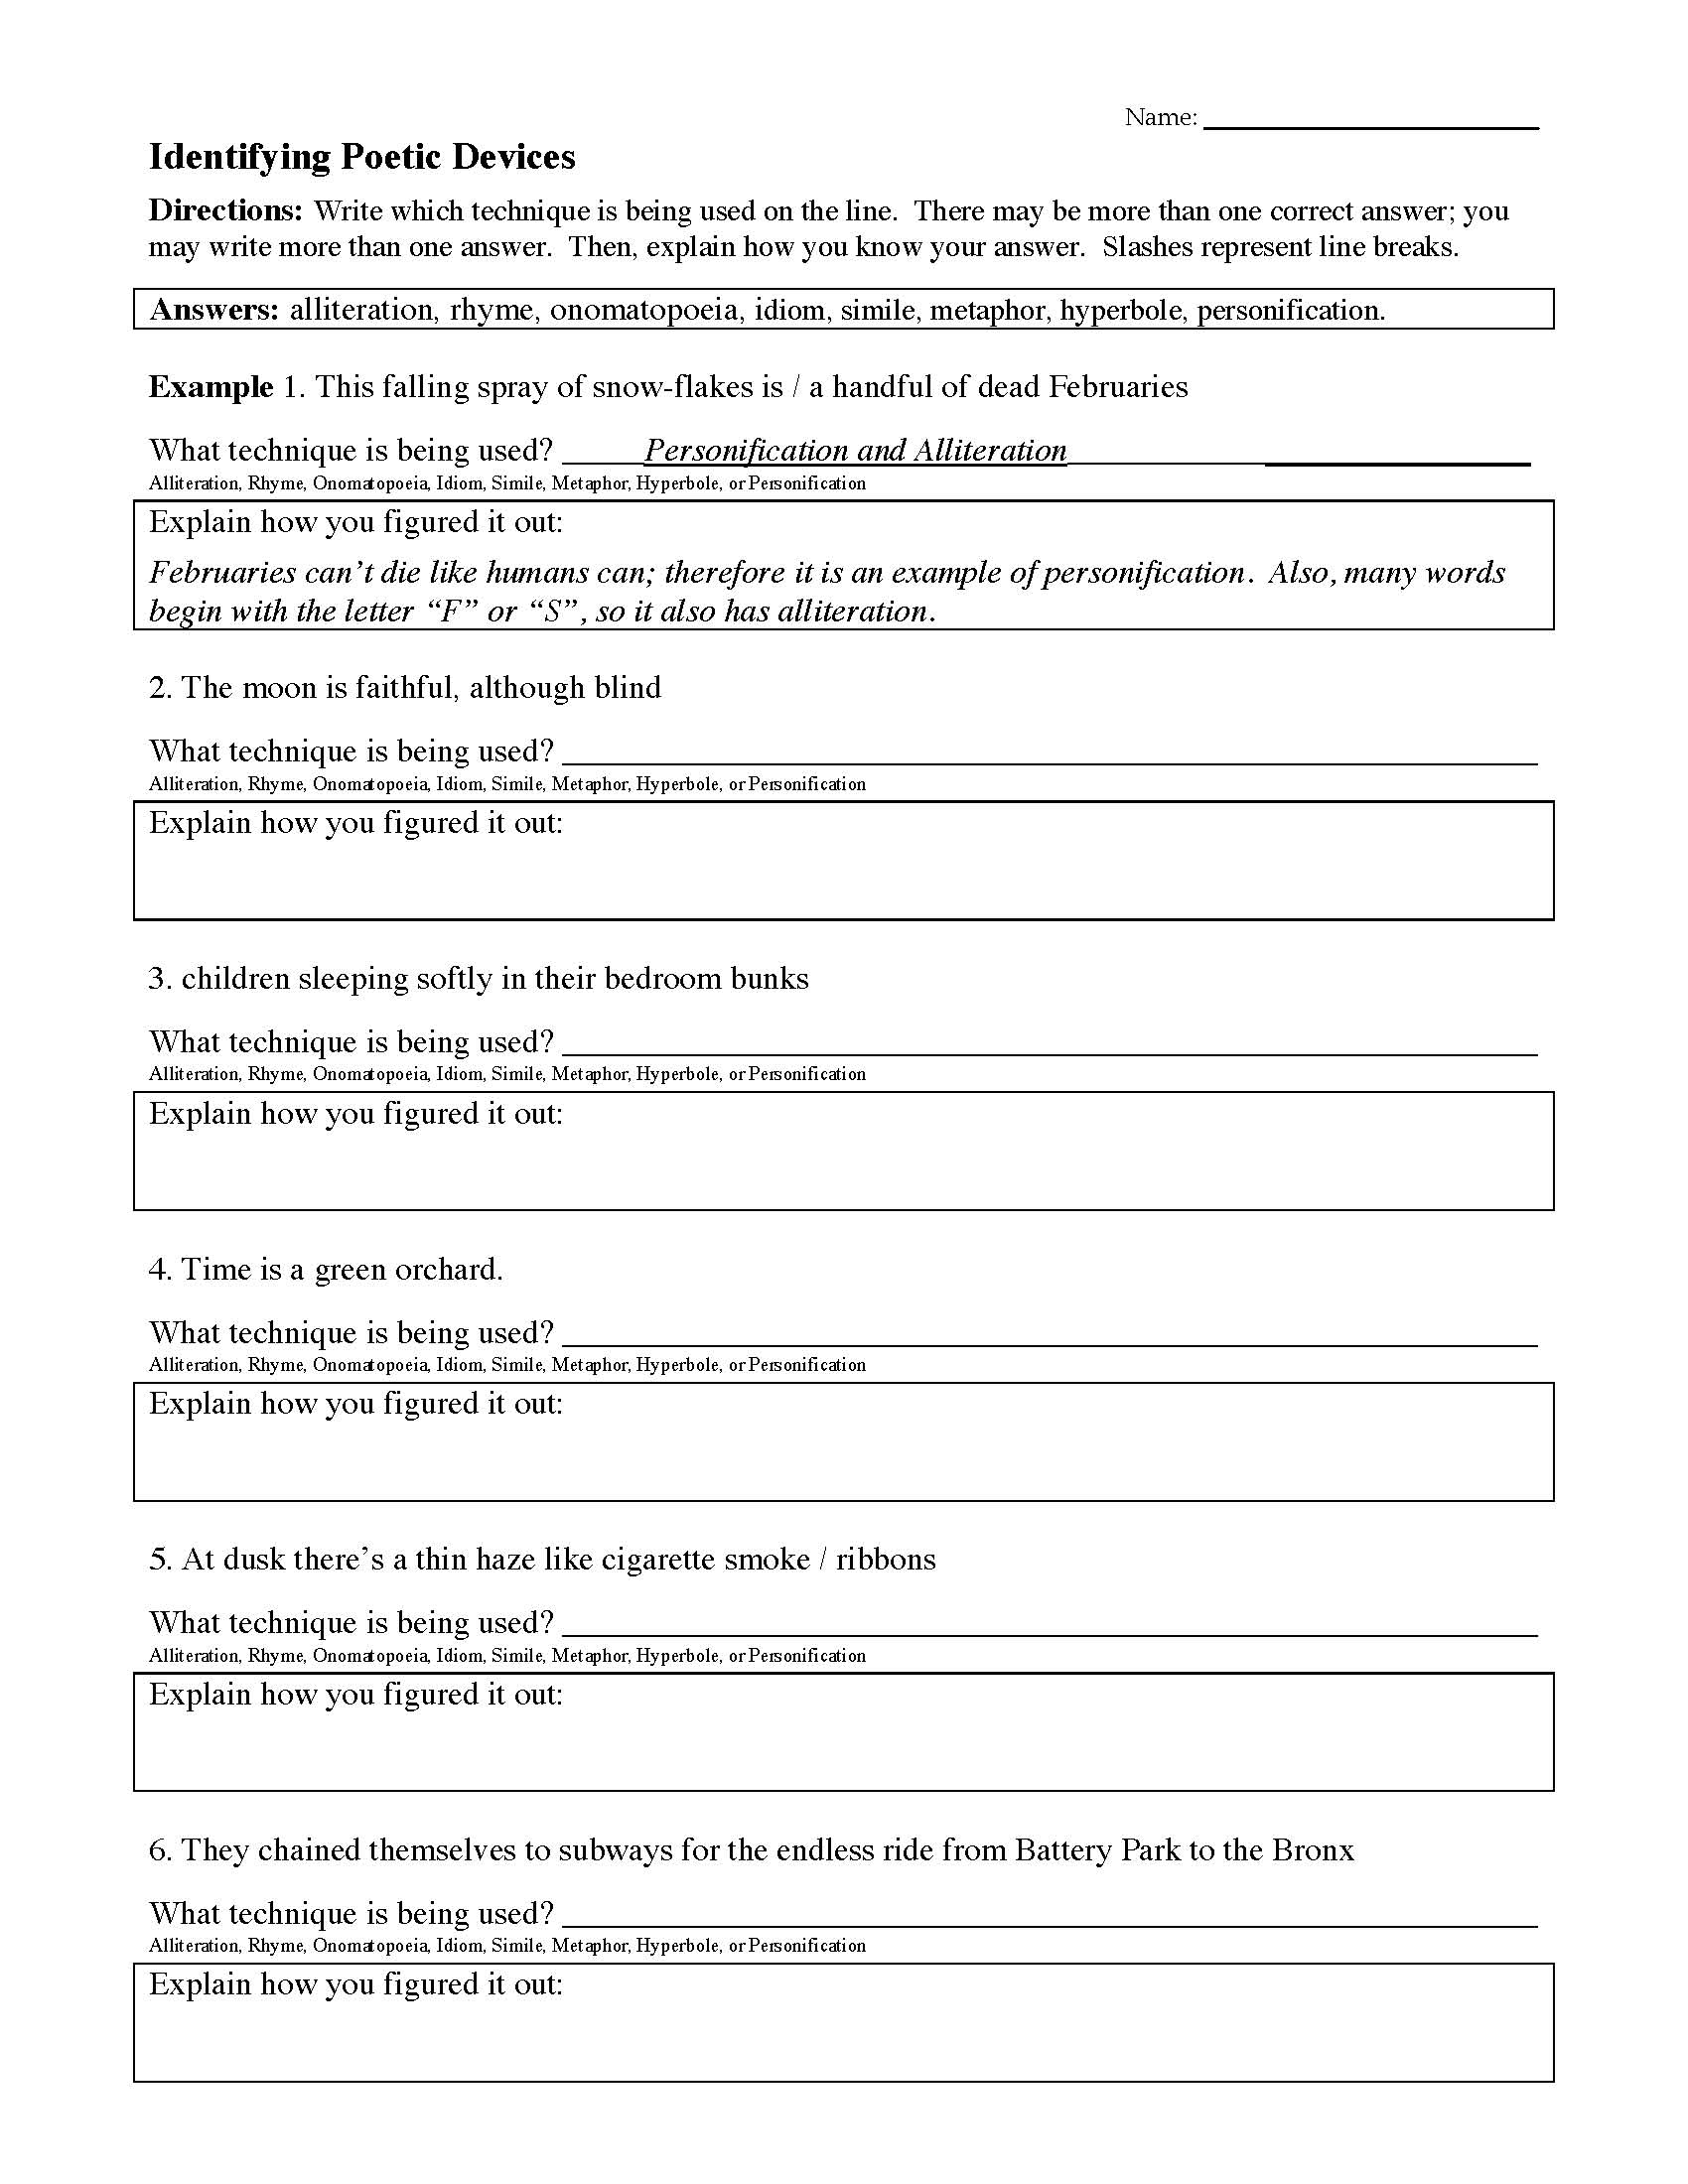 poetic-devices-worksheet-literature-worksheets-a-package-of-11-task-cards-on-poetic-sound